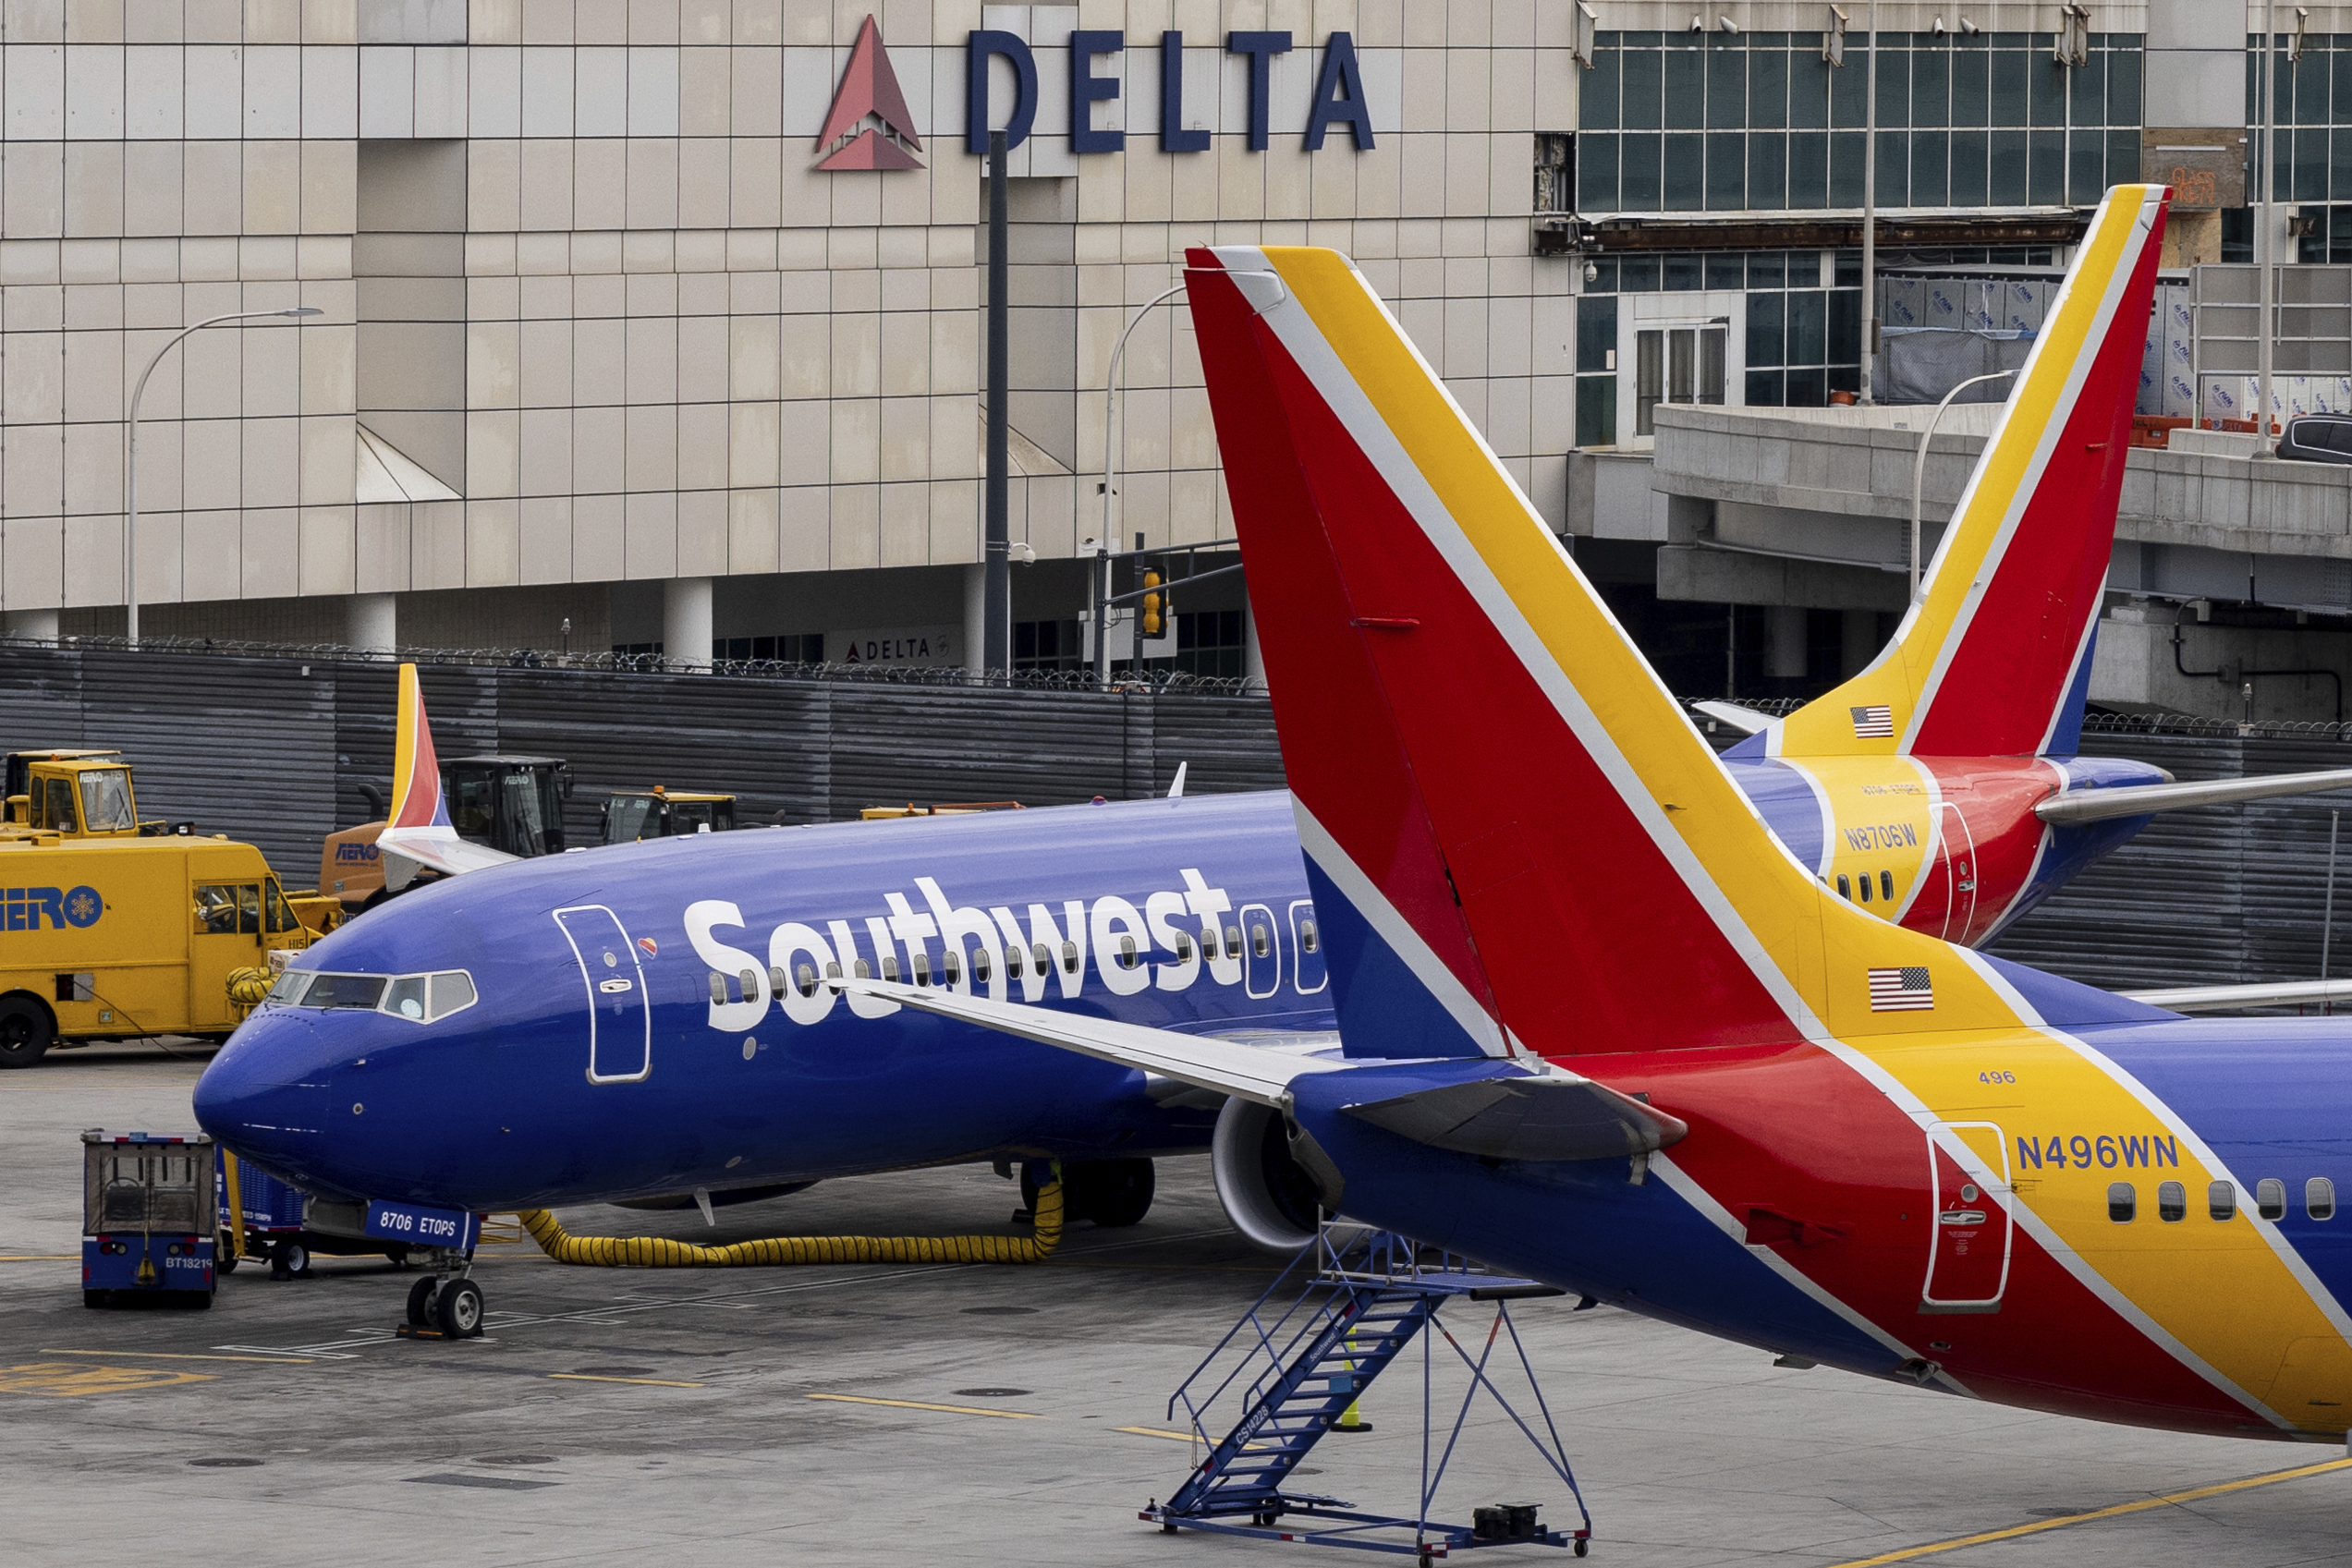 Southwest Airlines' aircrafts parked on the tarmac of LaGuardia Airport, Tuesday, Dec. 27, 2022, in New York. The U.S. Department of Transportation says it will look into flight cancellations by Southwest Airlines that have left travelers stranded at airports across the country amid an intense winter storm.